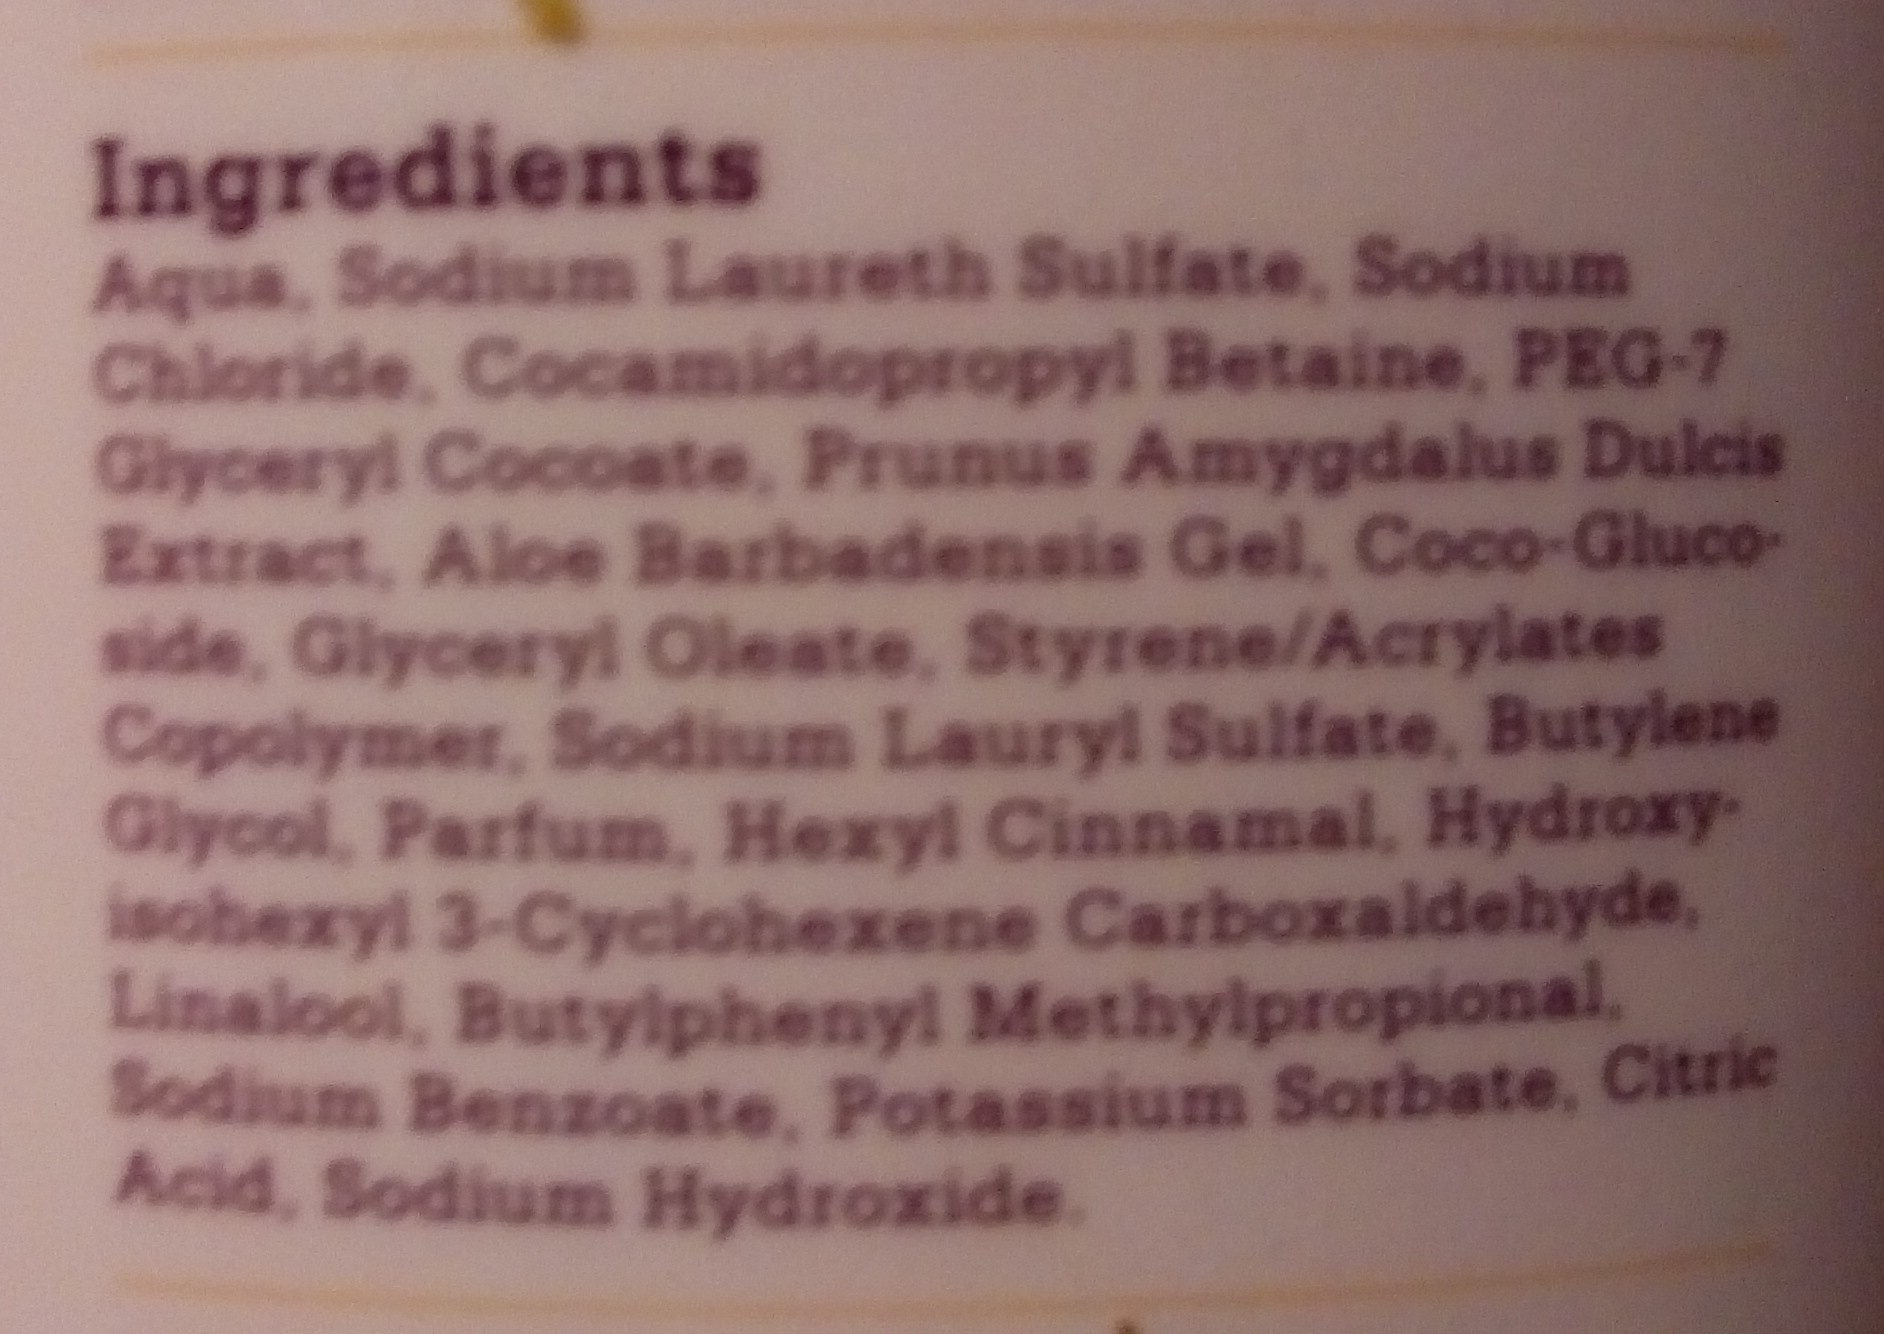 cremedouche extra care - Ingredients - nl